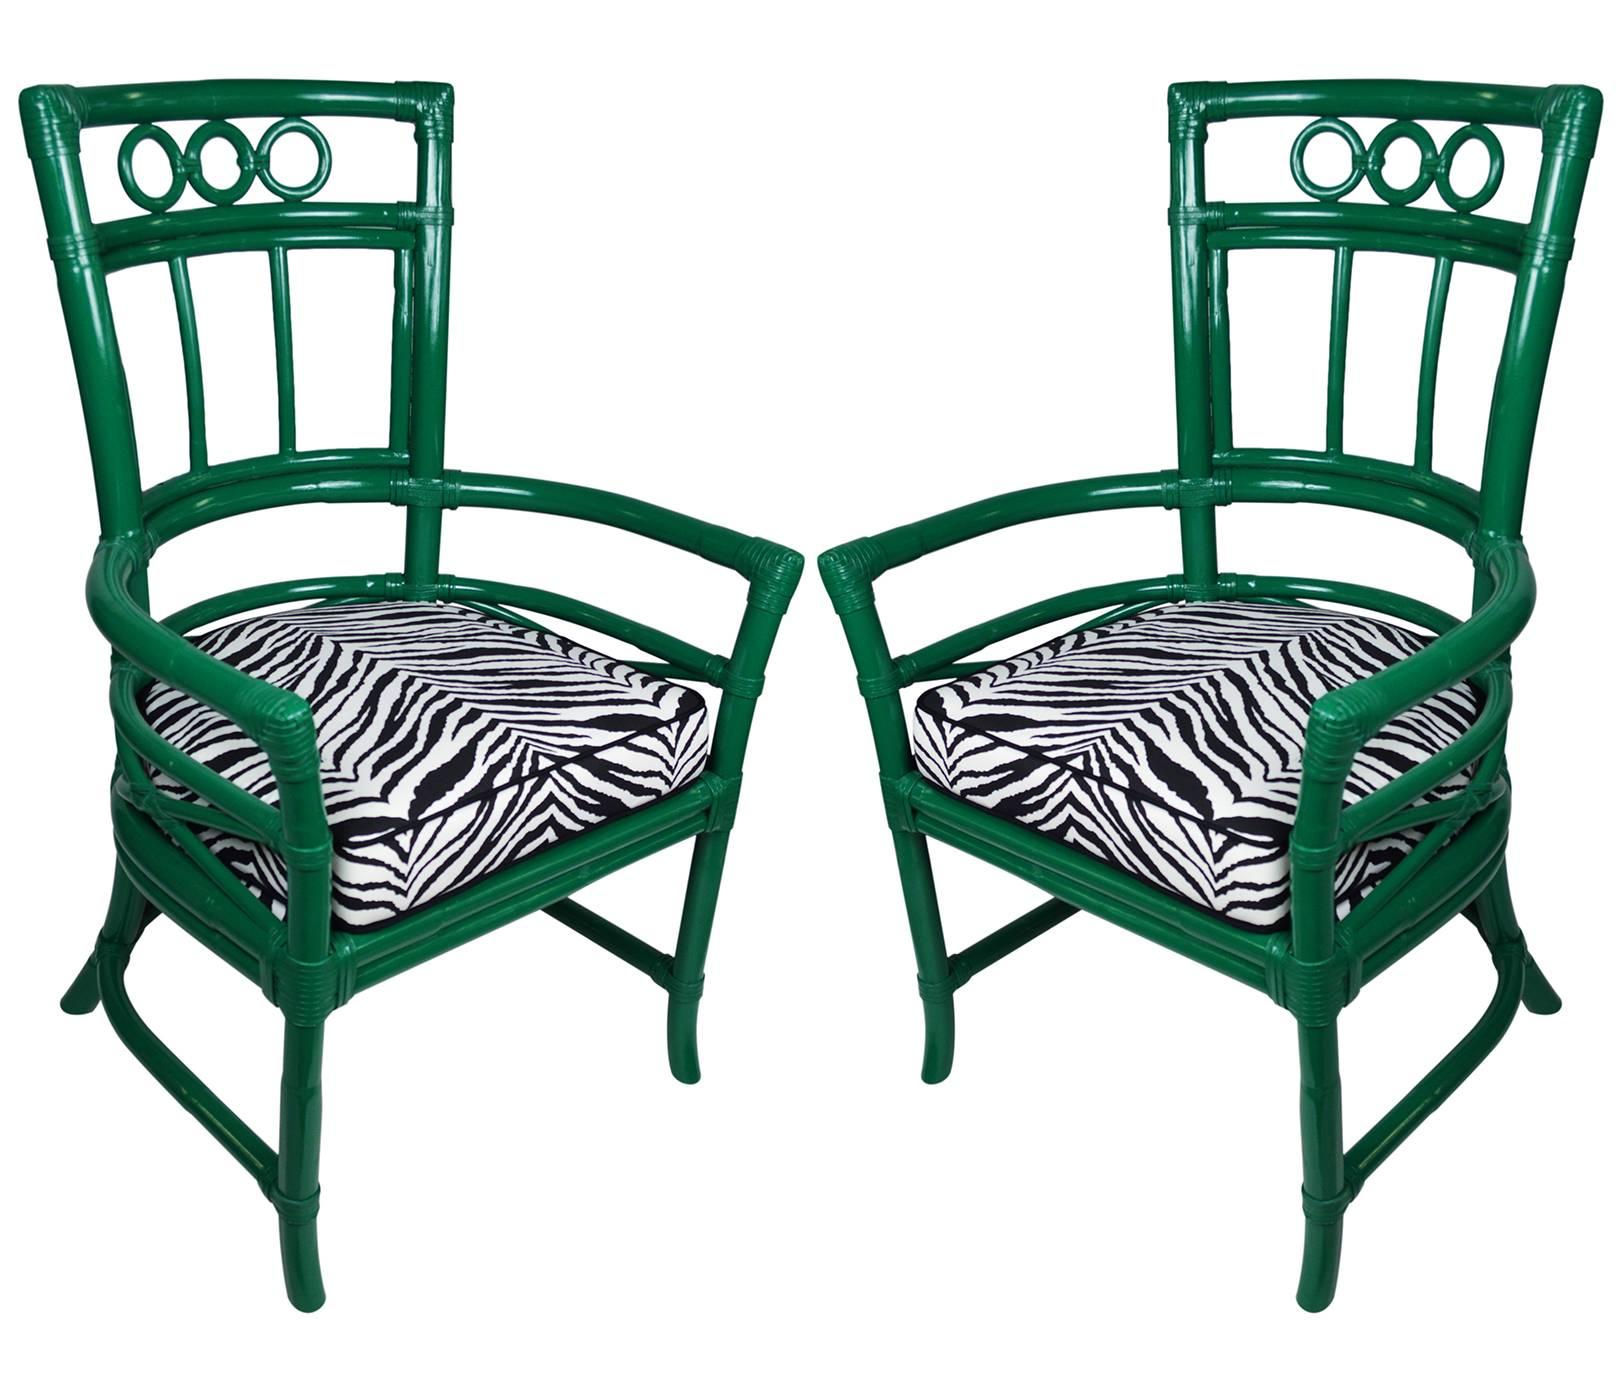 Pair of Ficks Reed armchairs newly lacquered in a deep emerald. The rattan frames are adorned with decorative circles and leather windings. The seat frames and new cushions are upholstered in a zebra print with black piping.